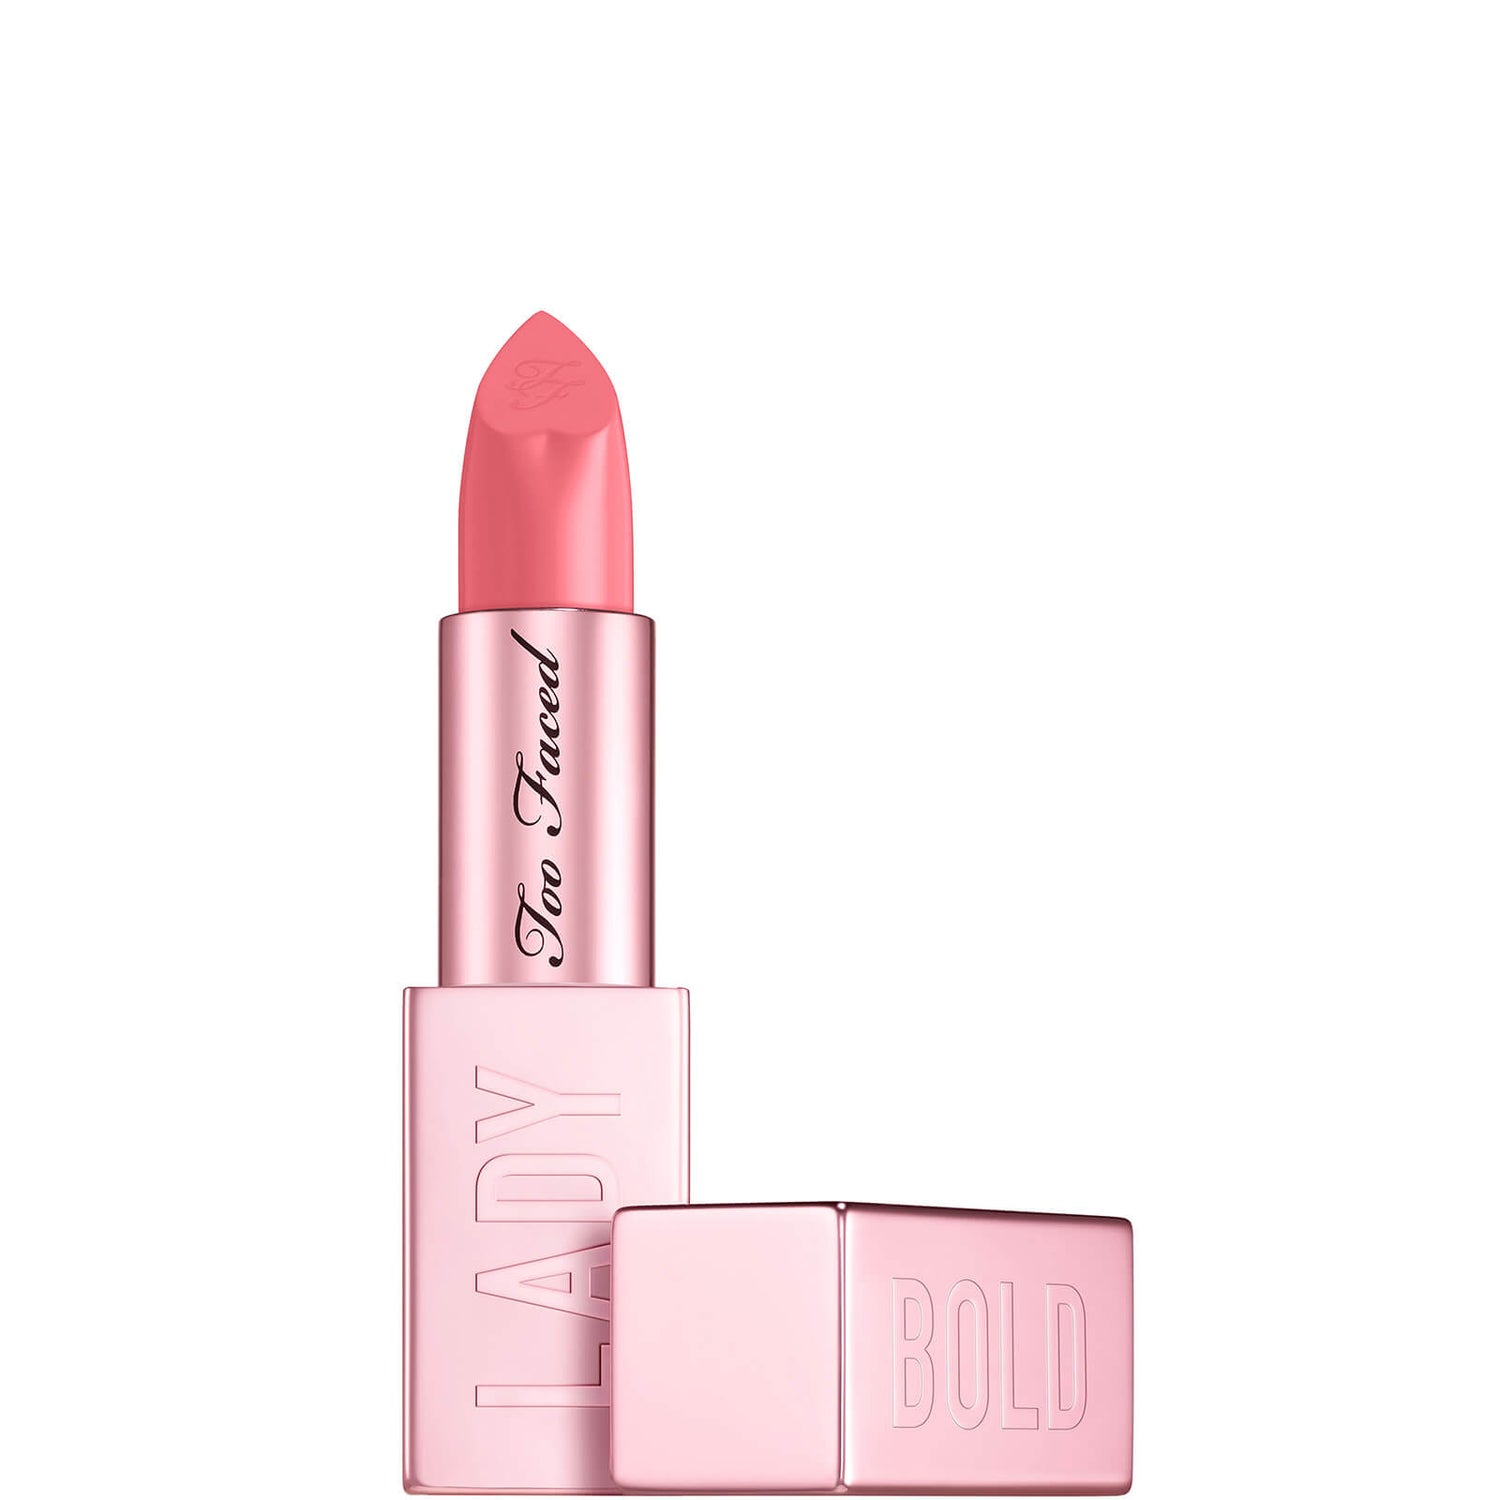 Too Faced Lady Bold Em-Power Pigment Lipstick - Hype Woman